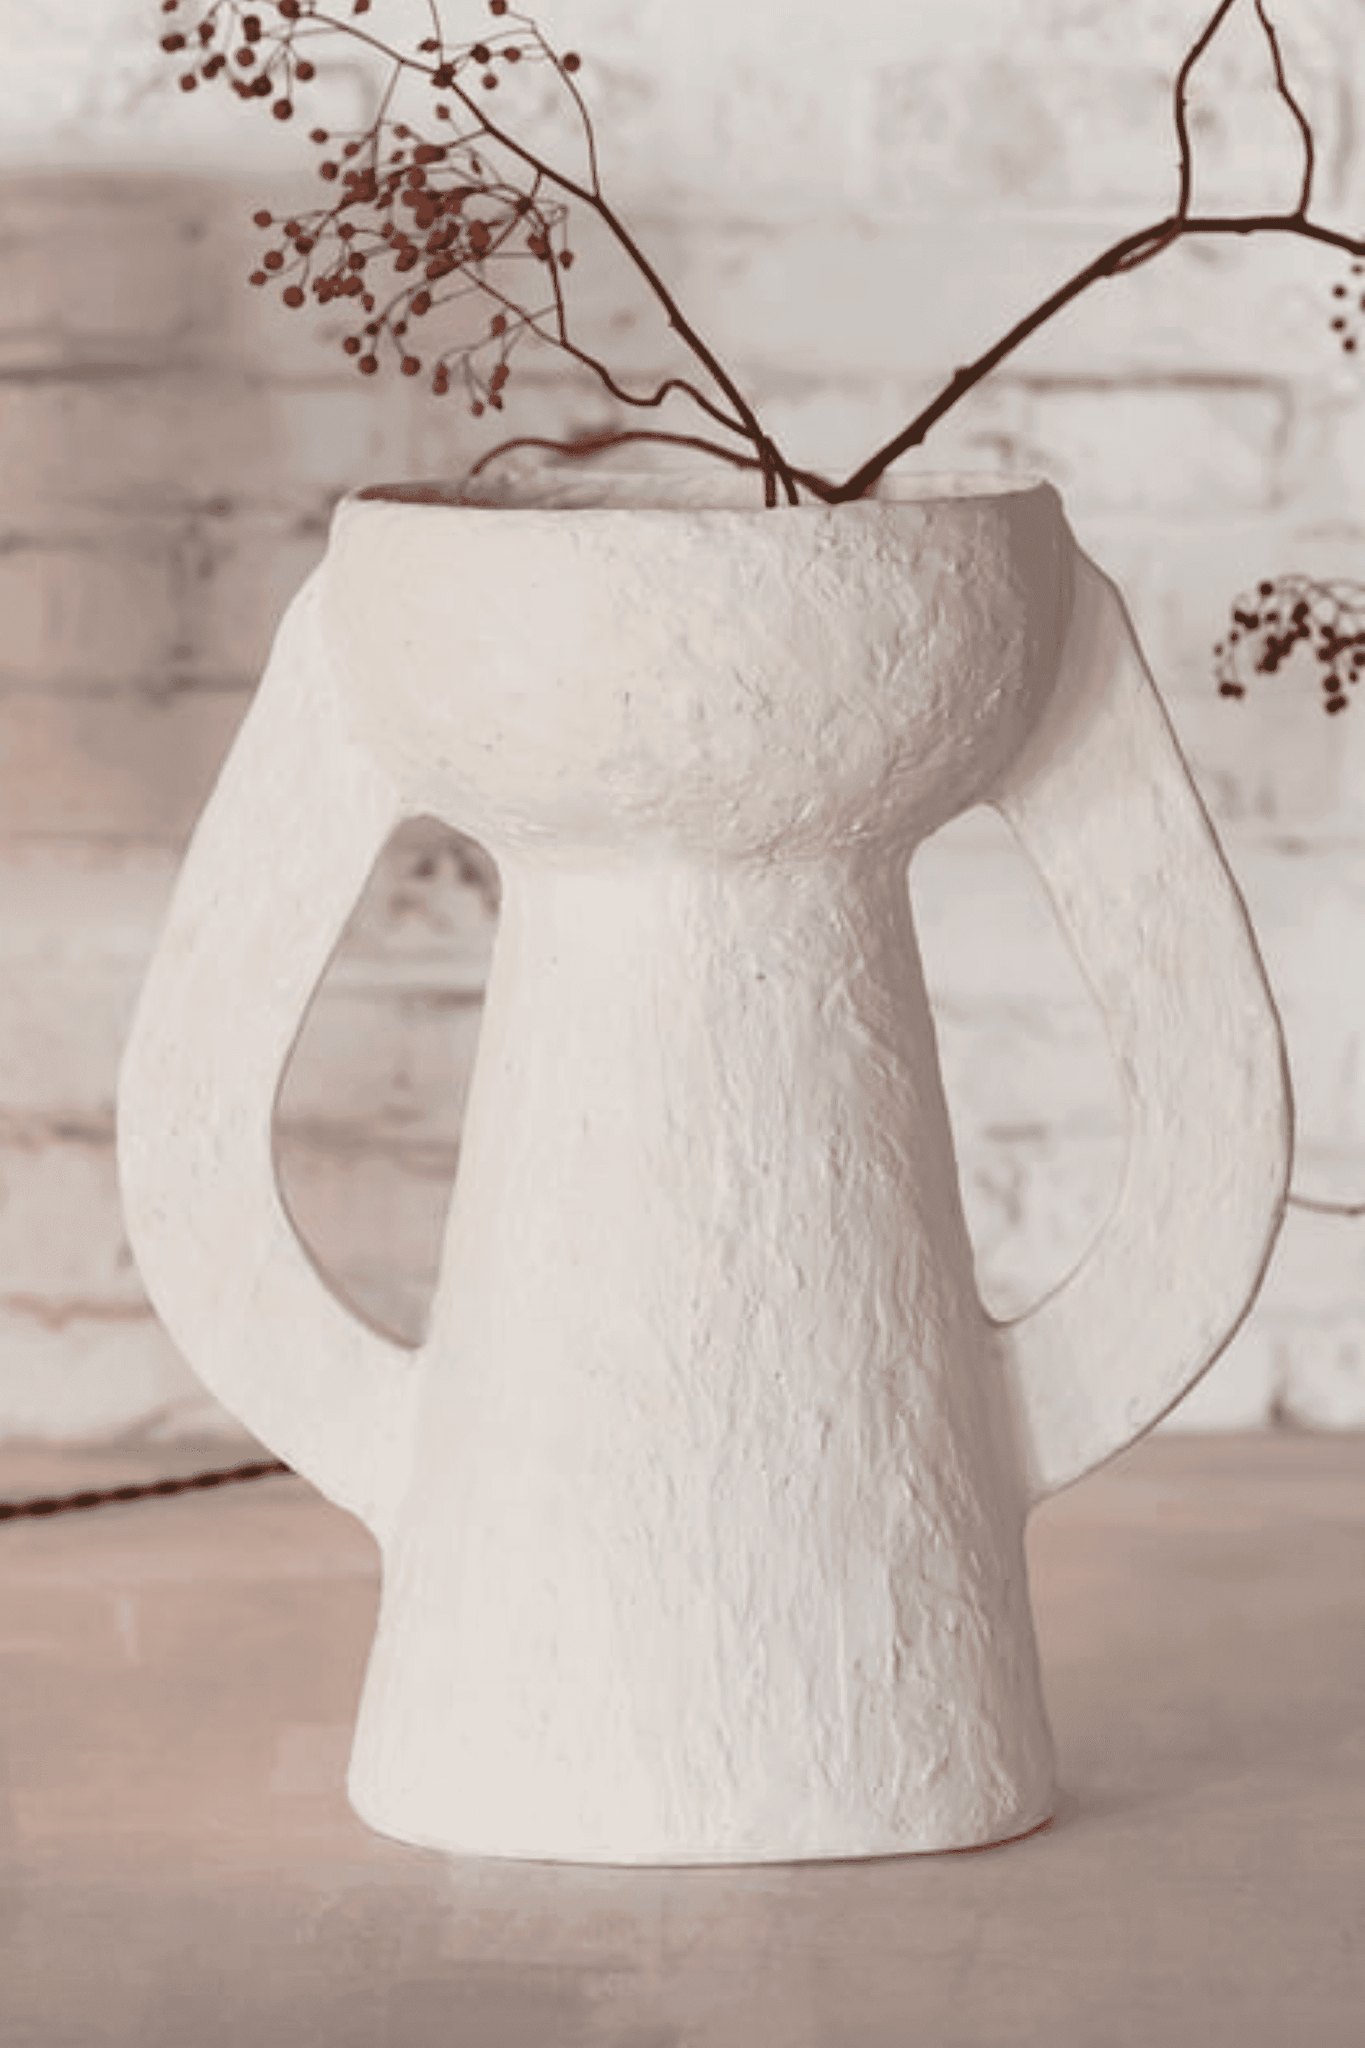 Large Vase, White Earth Marie Michielssen Serax shown with dried flowers